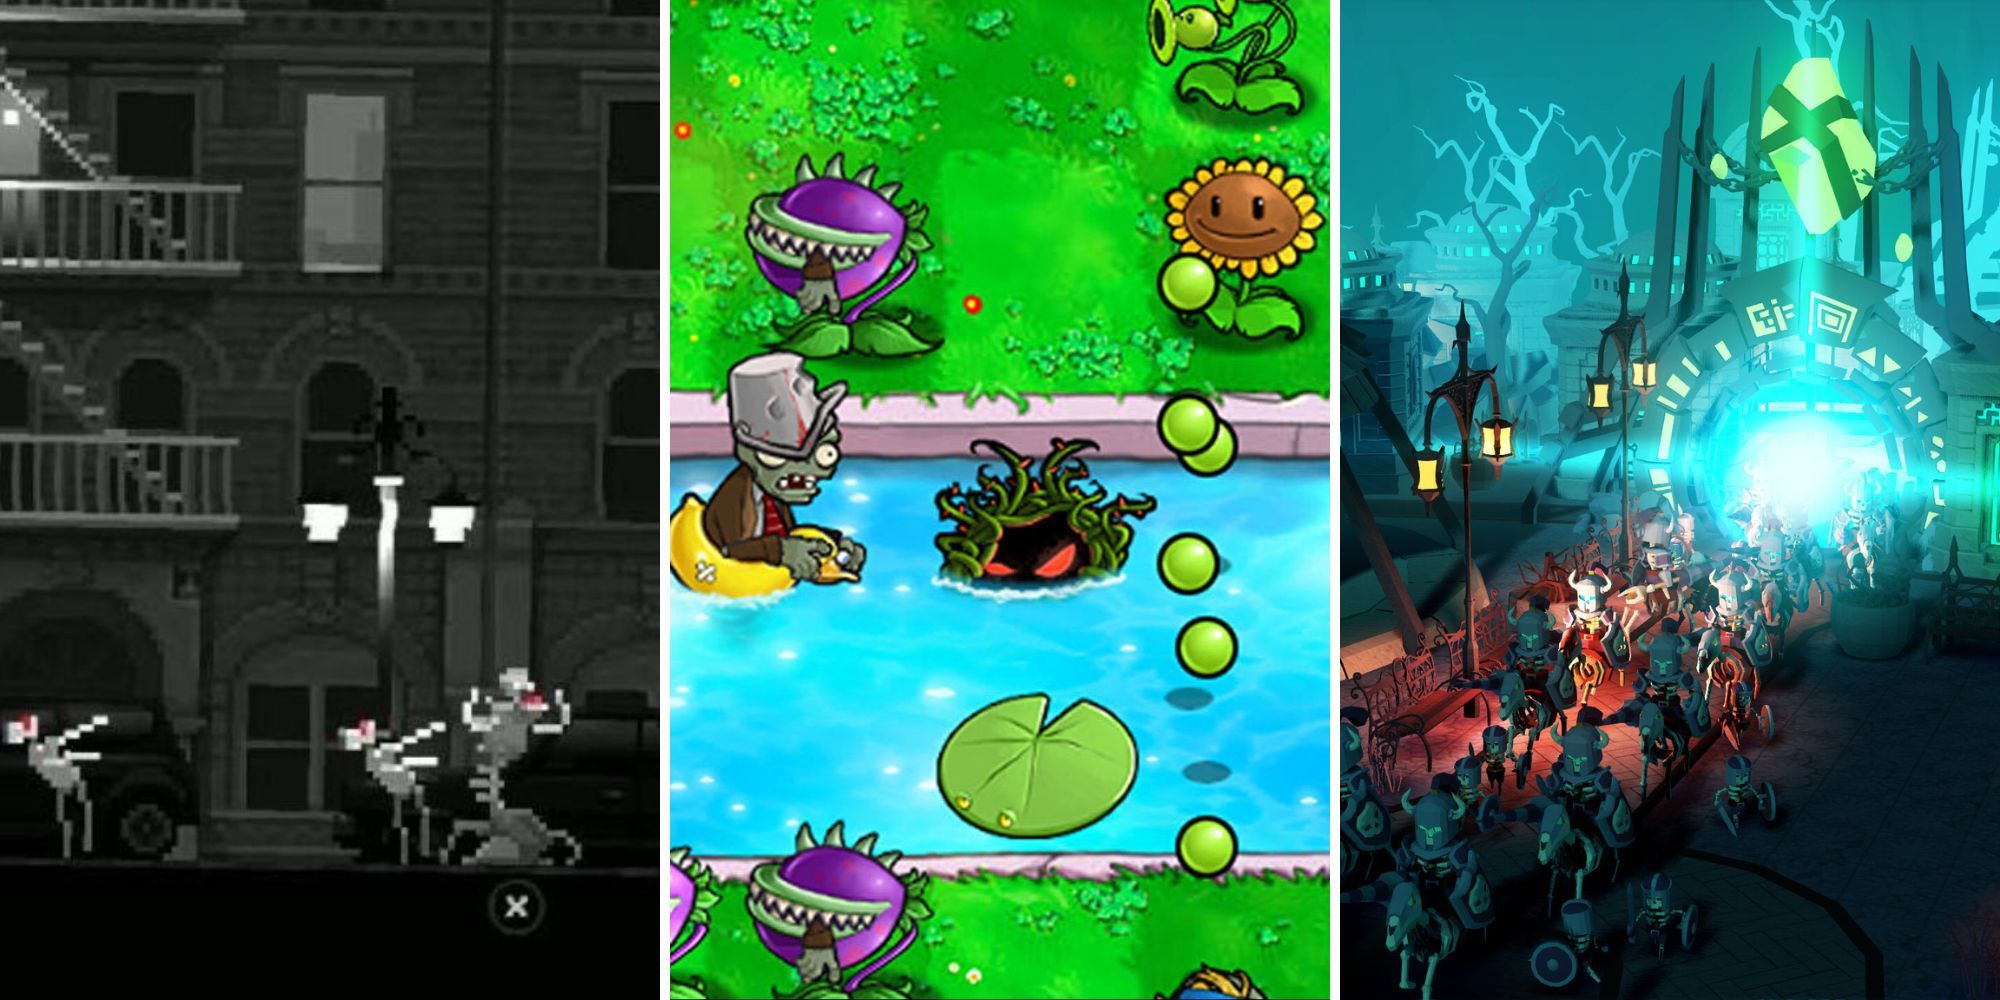 A grid showing the zombie strategy games Zombie Night Terror, Plants vs. Zombies, and Undead Horde 2: Necropolis